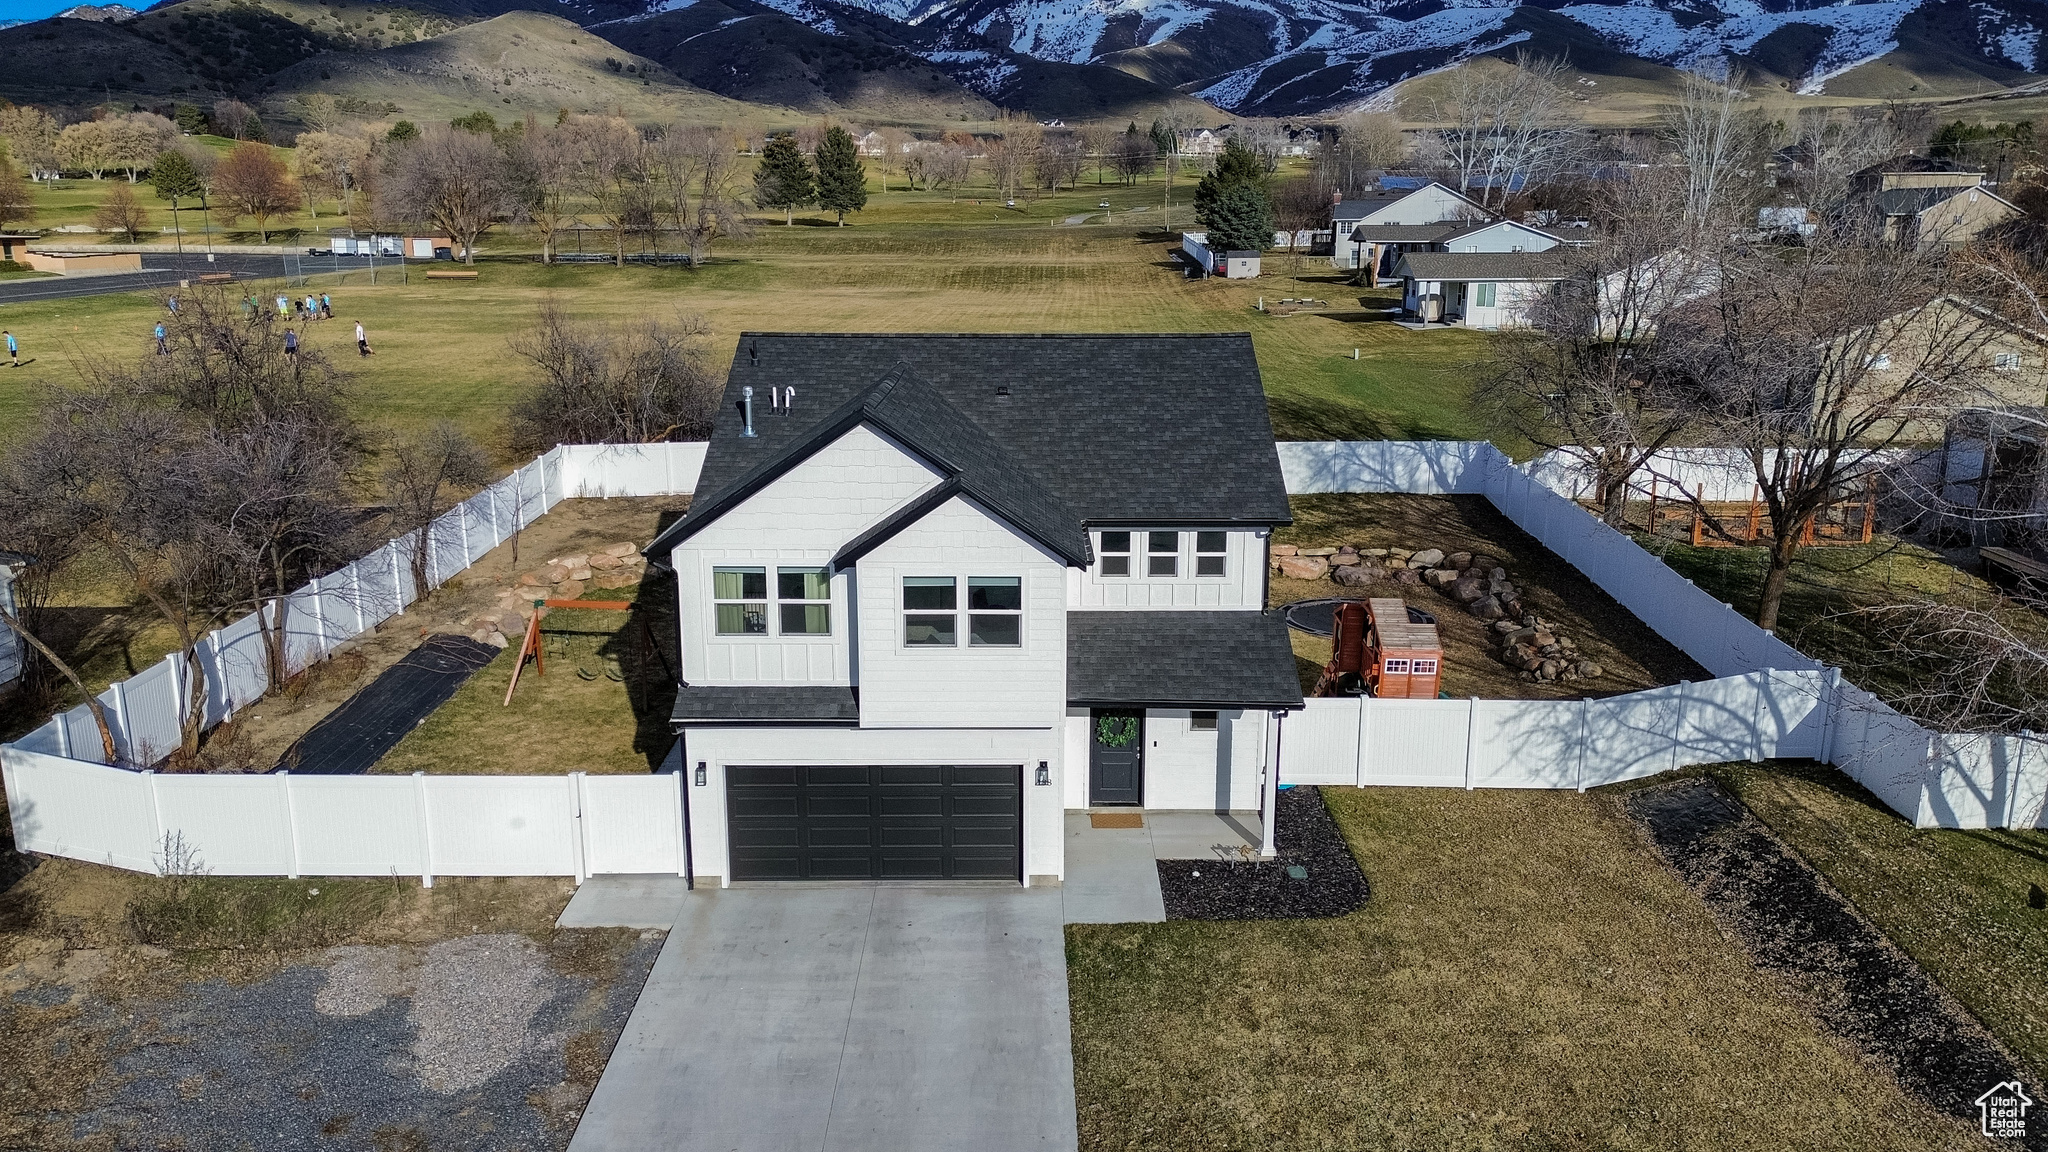 188 S 530 E, Smithfield, Utah 84335, 4 Bedrooms Bedrooms, 12 Rooms Rooms,1 BathroomBathrooms,Residential,For sale,530,1988053